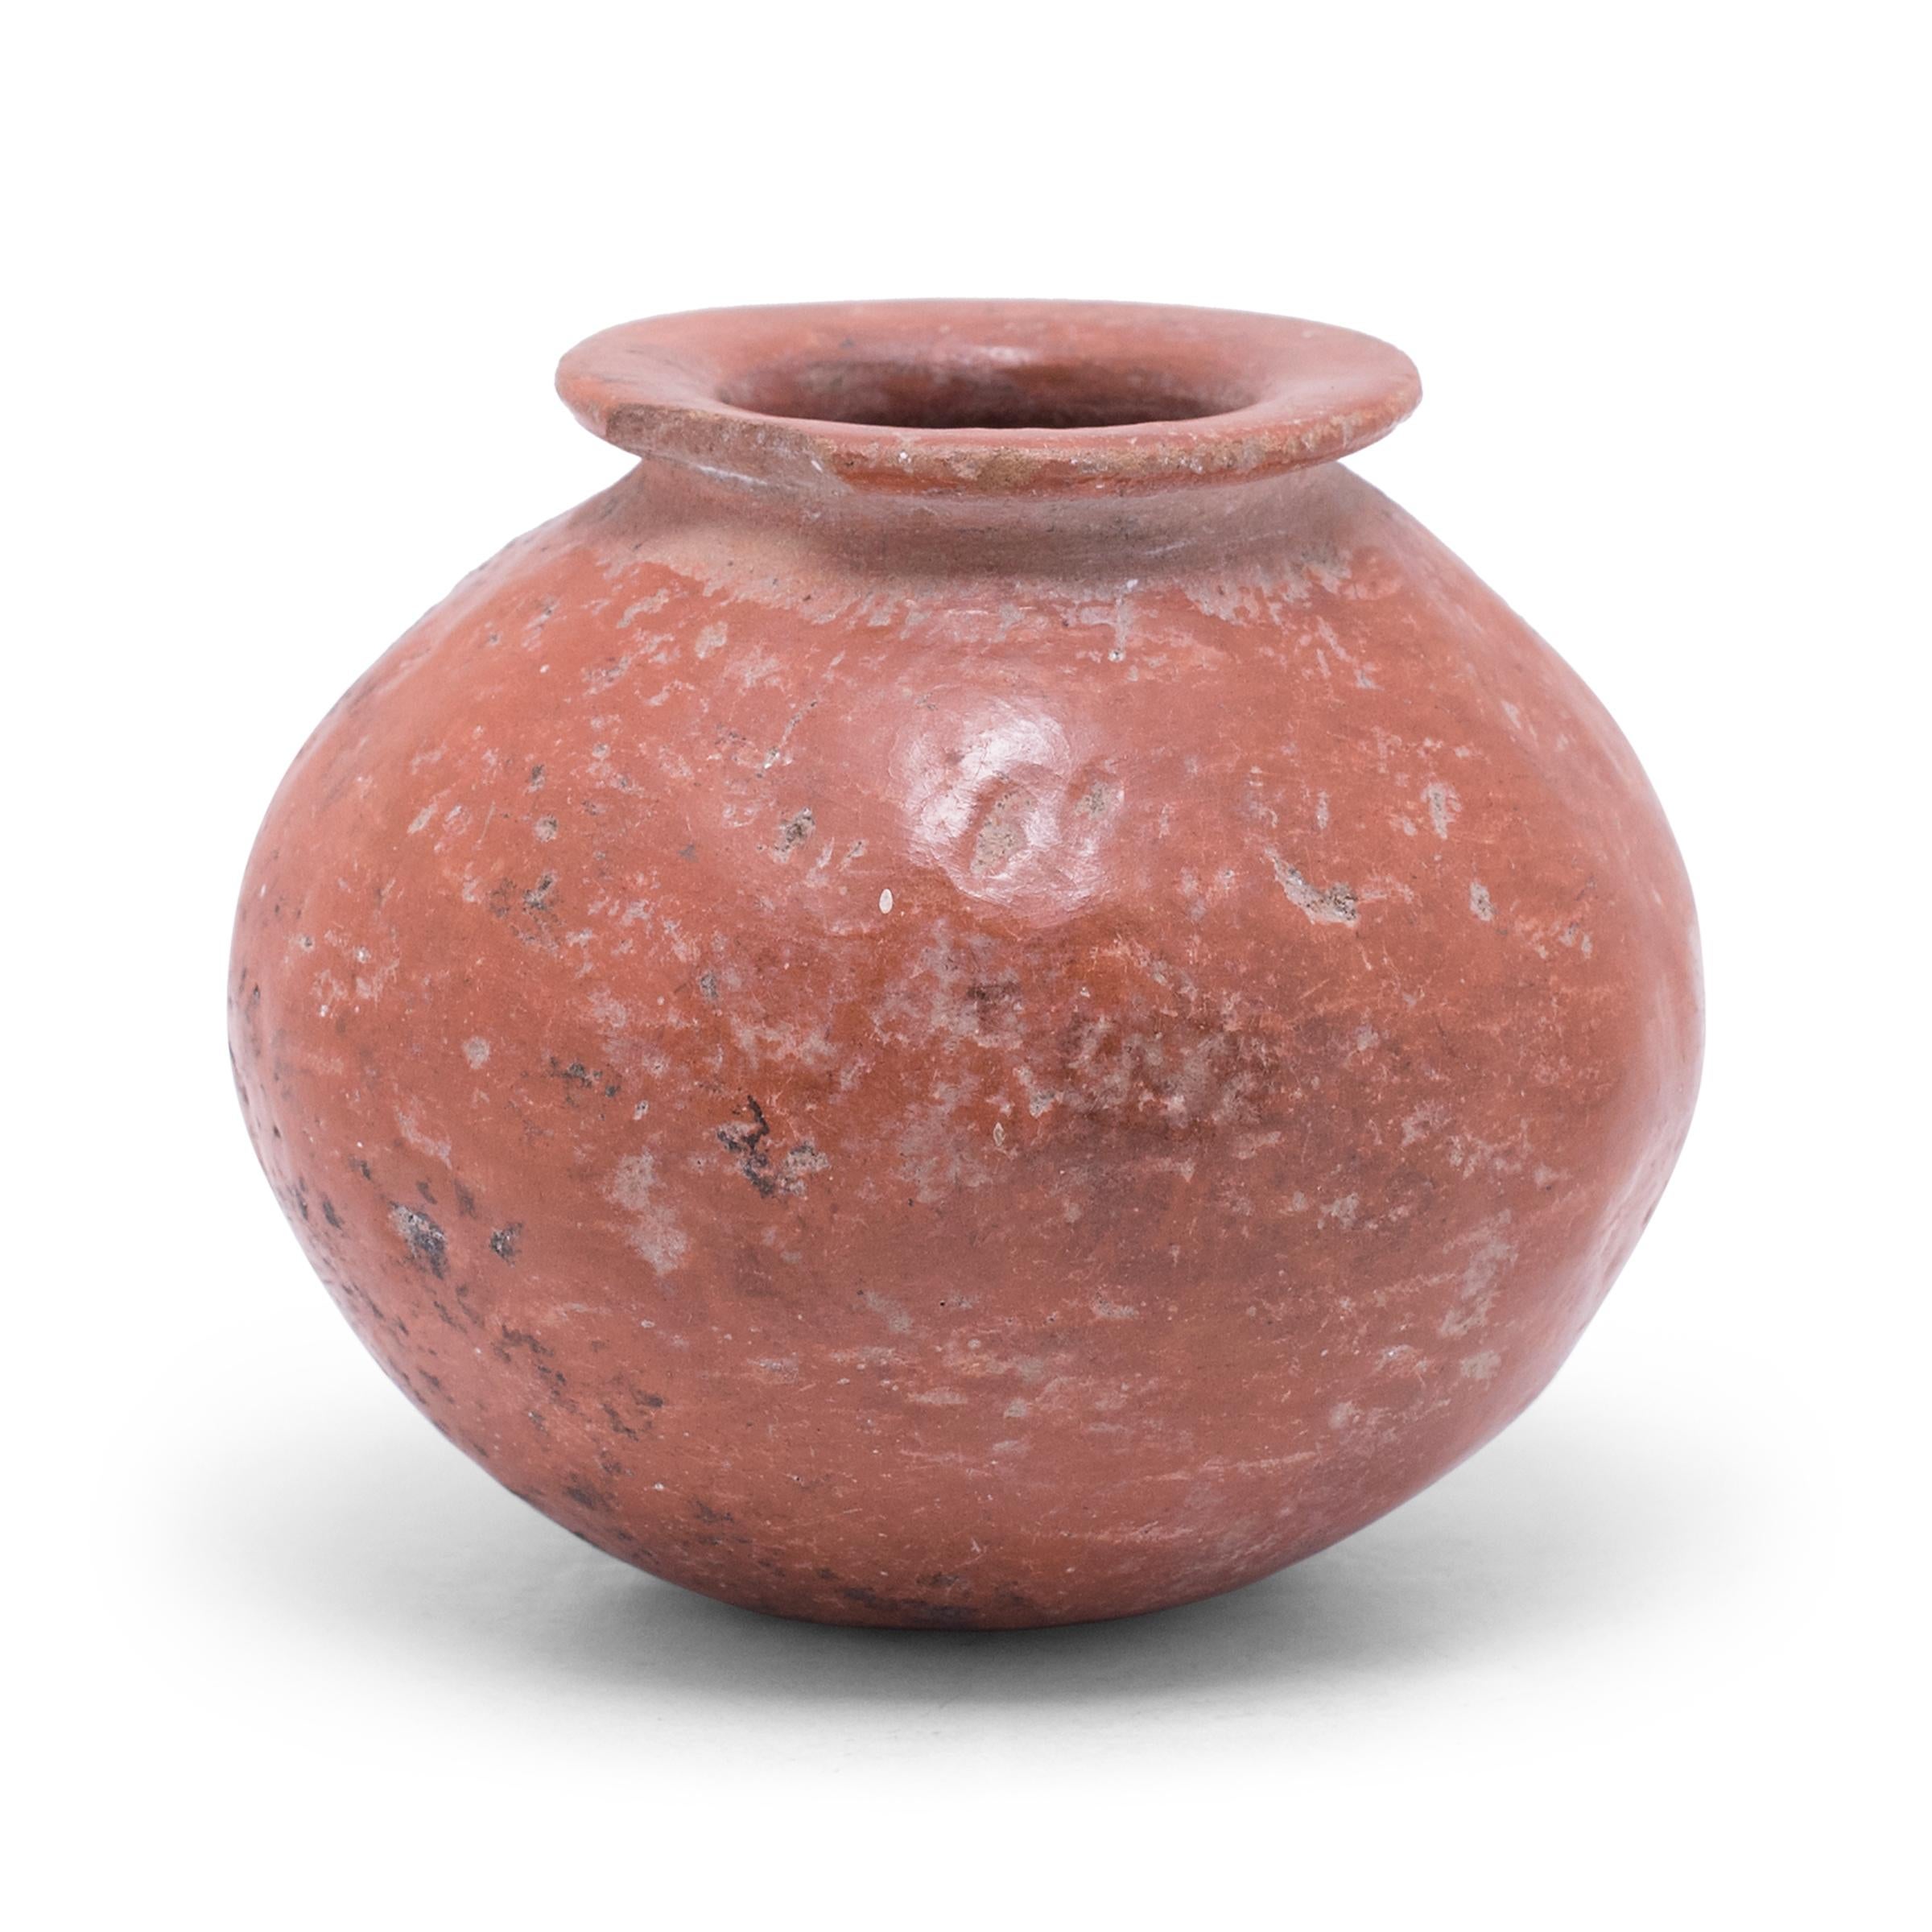 Exhibiting a rich patina and a beautifully irregular pattern of pitted wear, this petite redware olla vessel shows many telltale signs of Pre-Columbian pottery. The vessel has a globular form with a rounded base, constricted neck, and flattened rim.